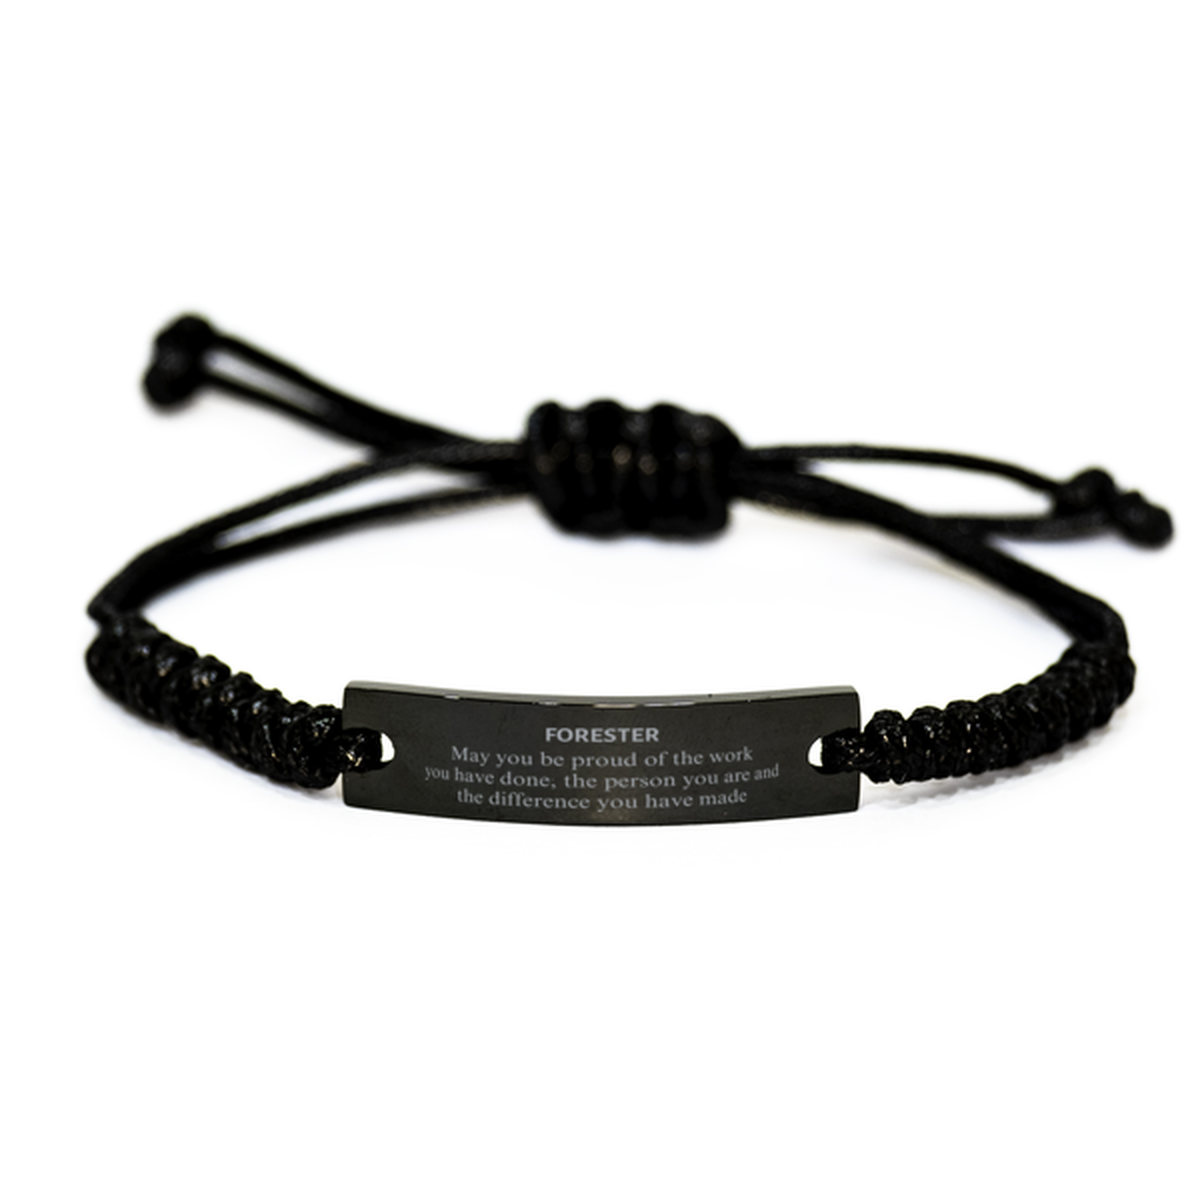 Forester May you be proud of the work you have done, Retirement Forester Black Rope Bracelet for Colleague Appreciation Gifts Amazing for Forester